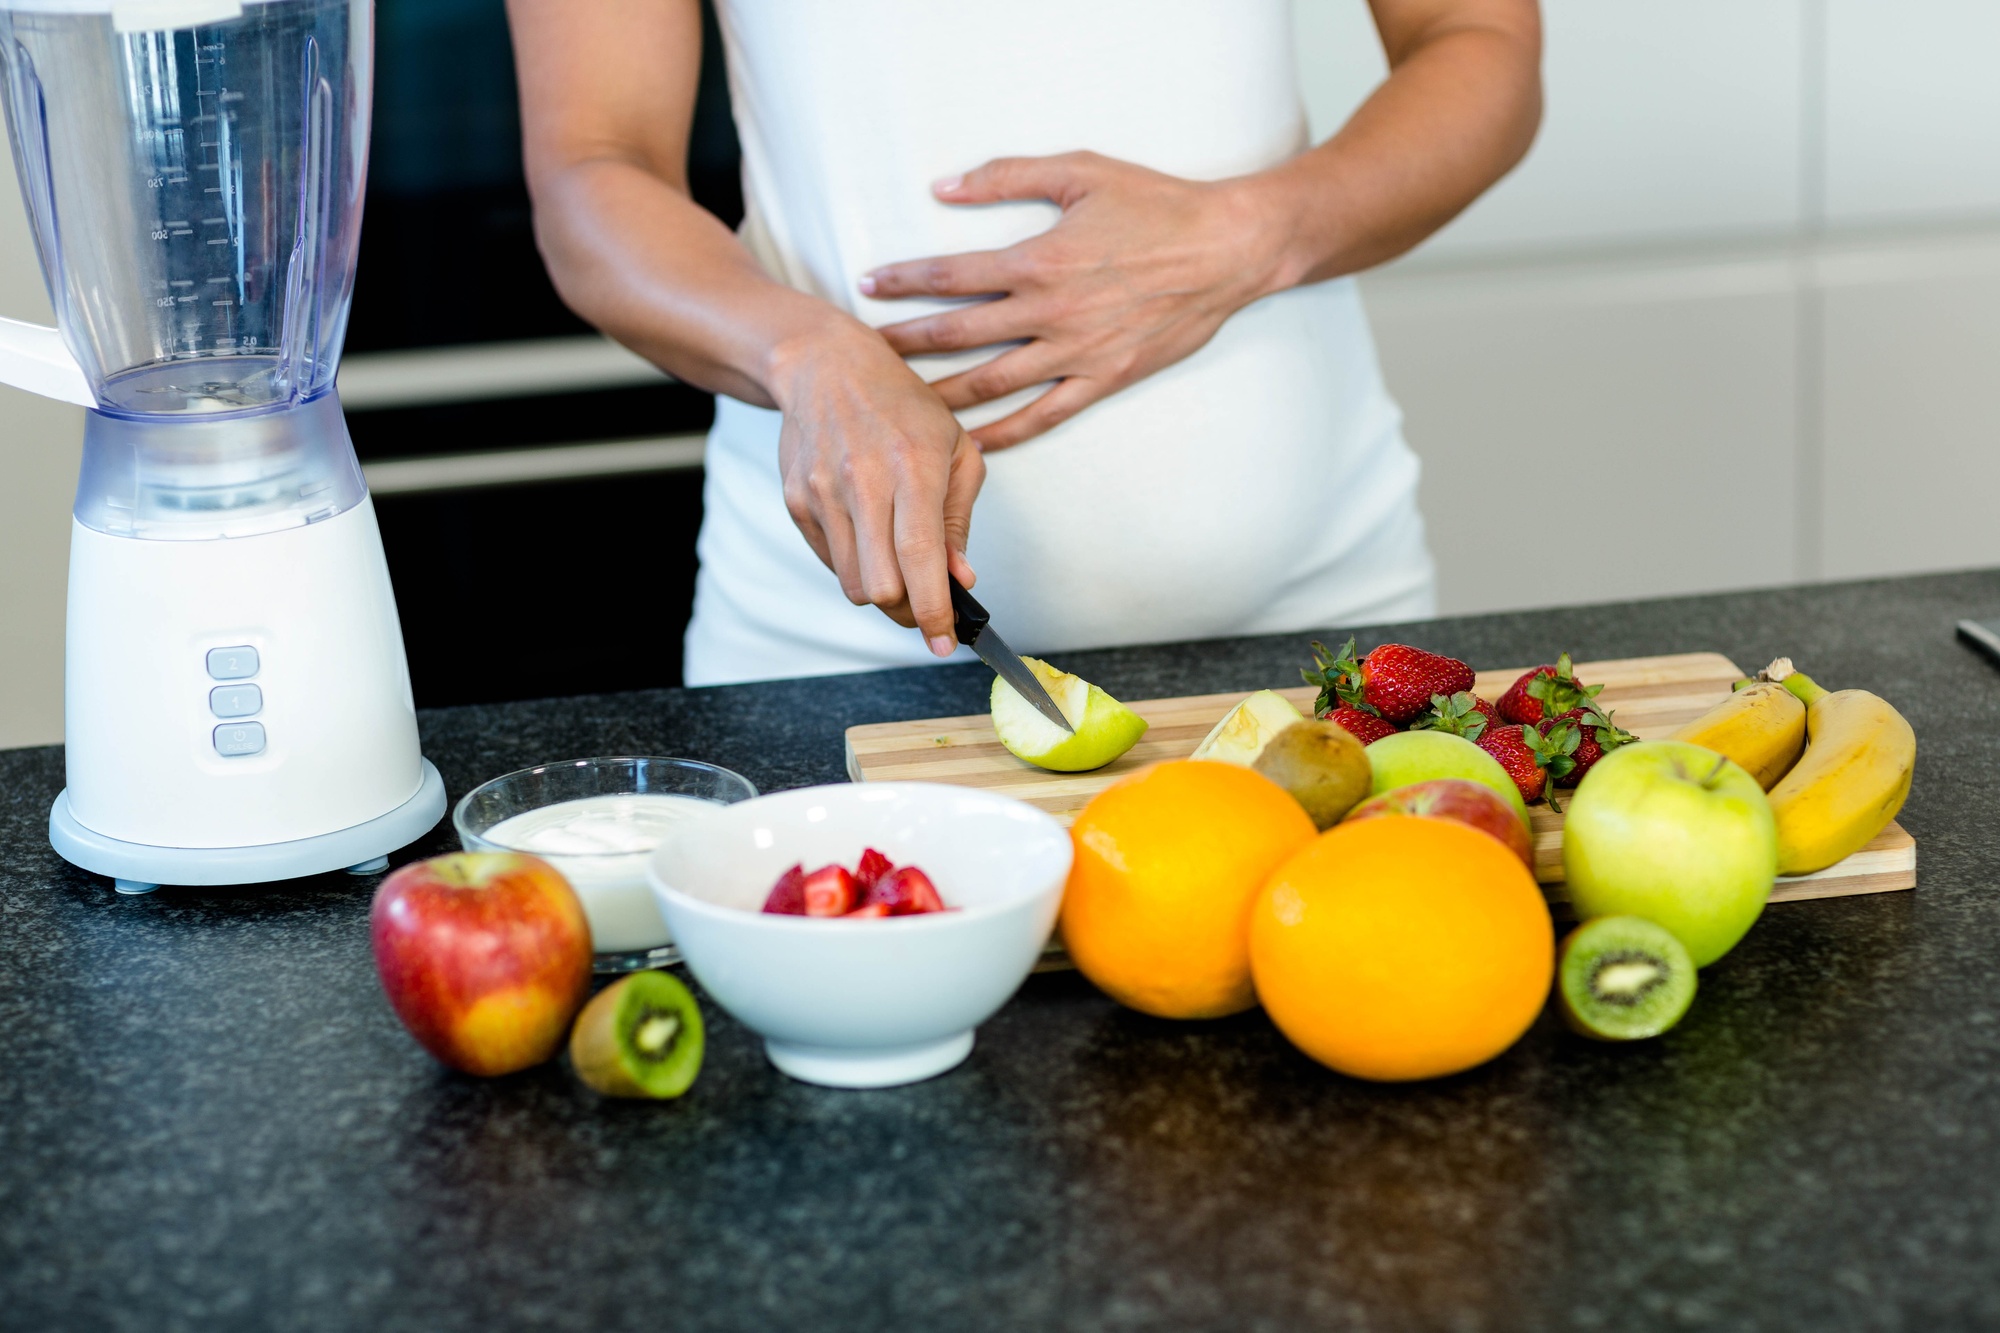 Pregnant woman touching her belly while cutting fruits